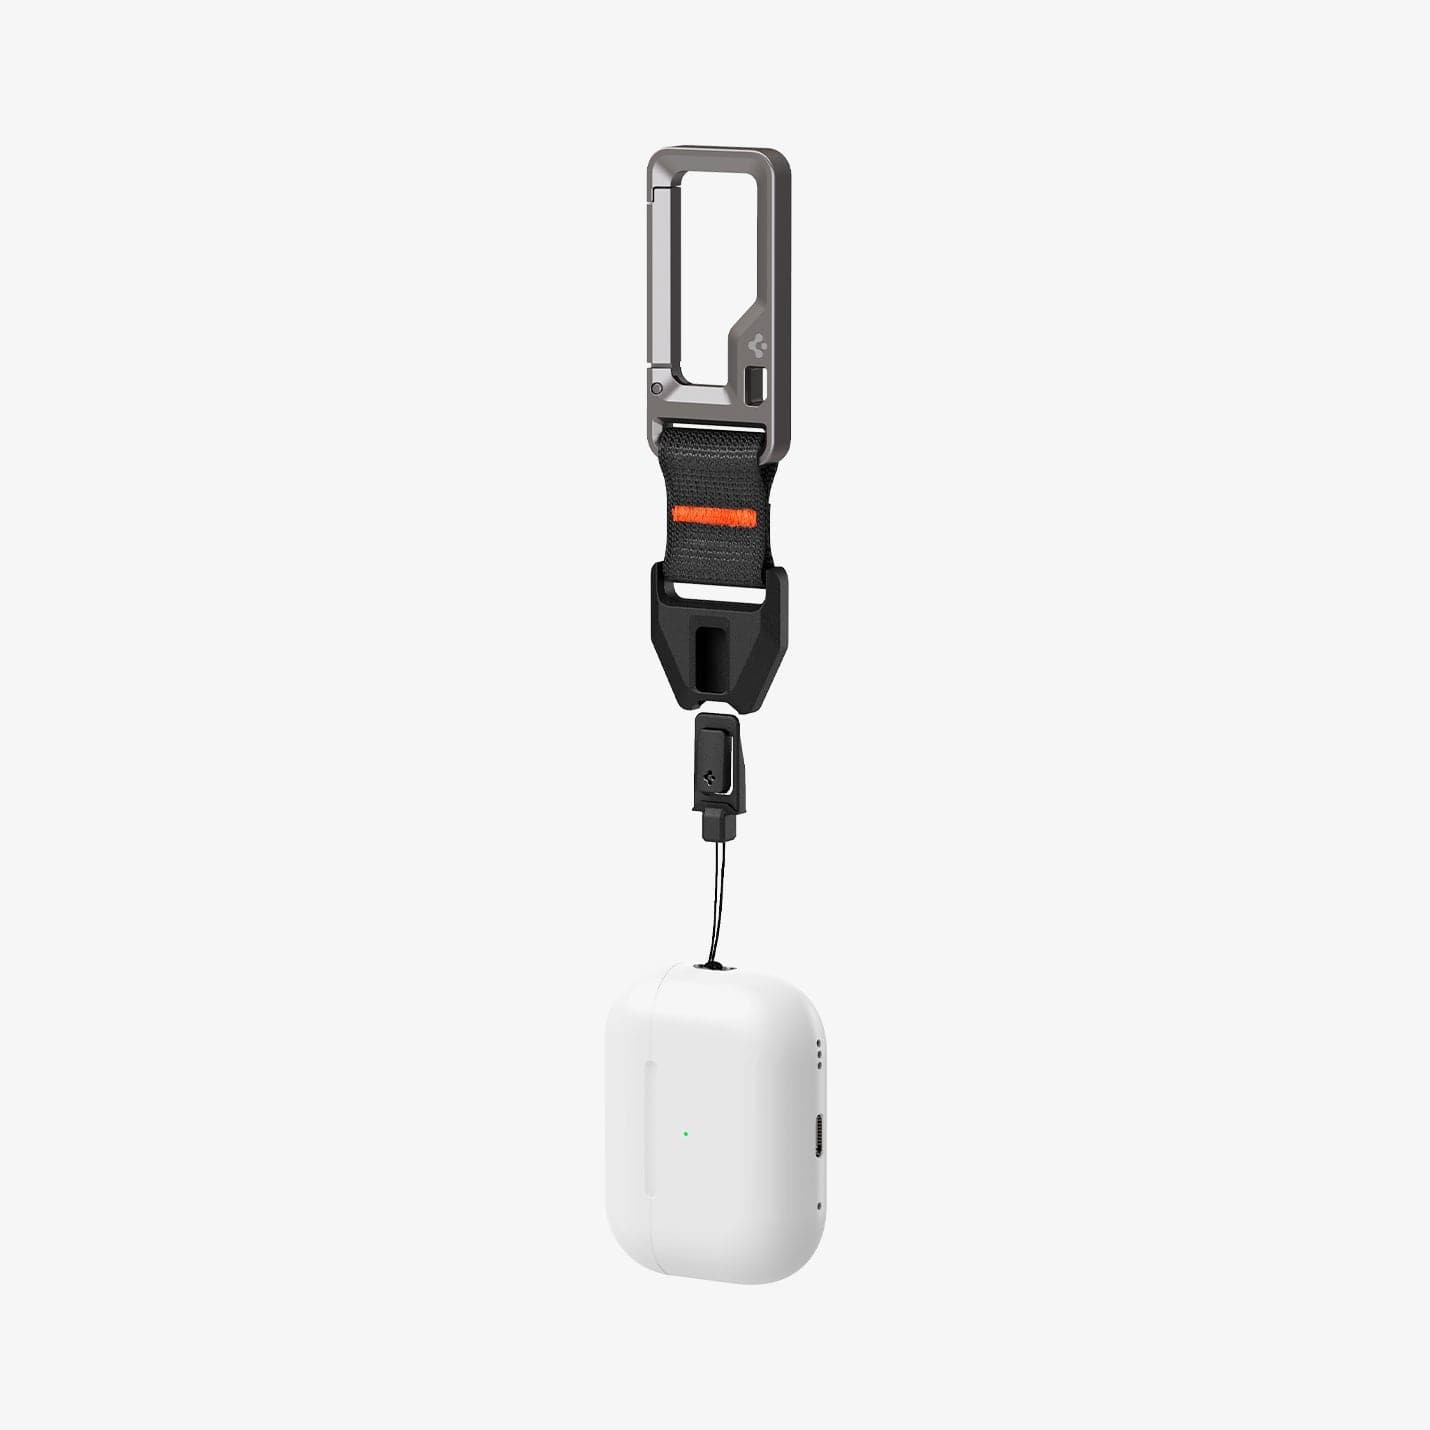 ASD05861 - AirPods Pro 2 Lanyard Carabiner in black showing the front and side with AirPods connected